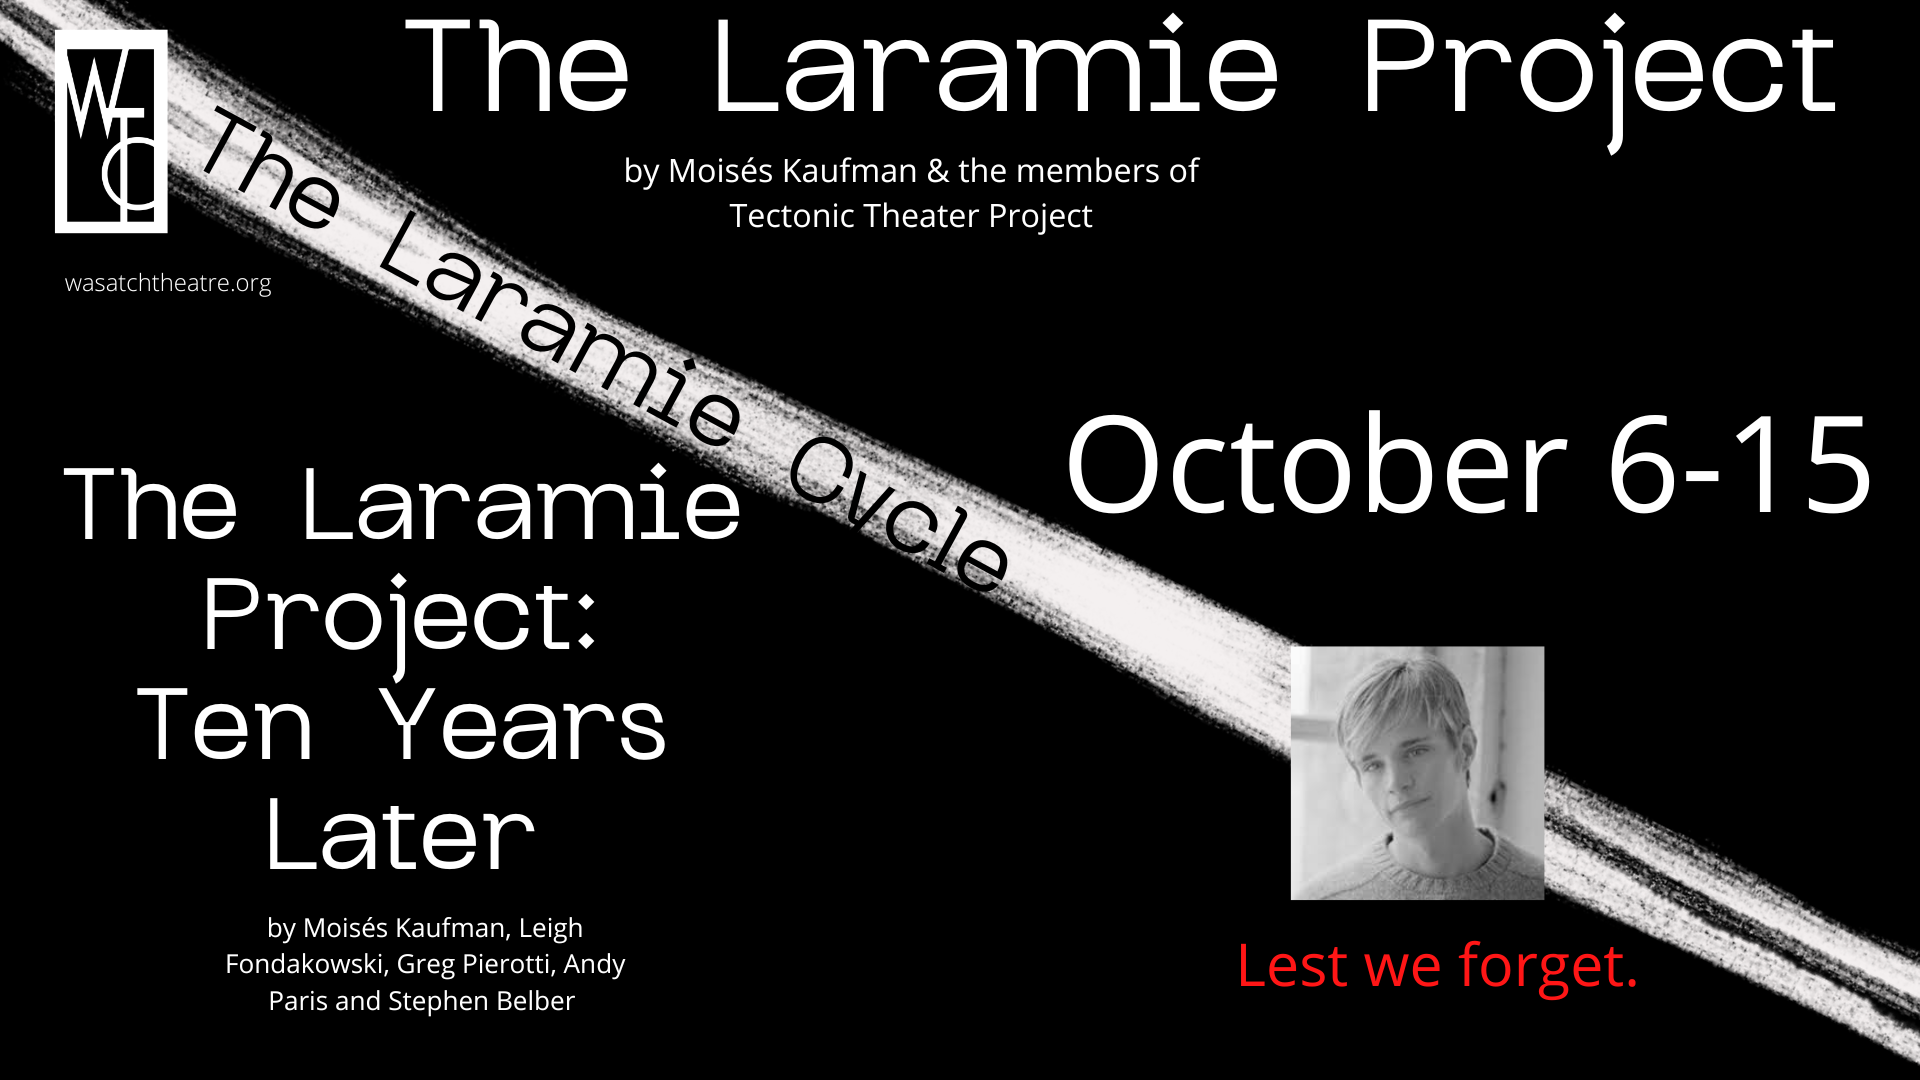 The Laramie Project isn’t a play where you will leave from the theater humming catchy tunes, but it is a moment to focus on the reality of the truths we carry.